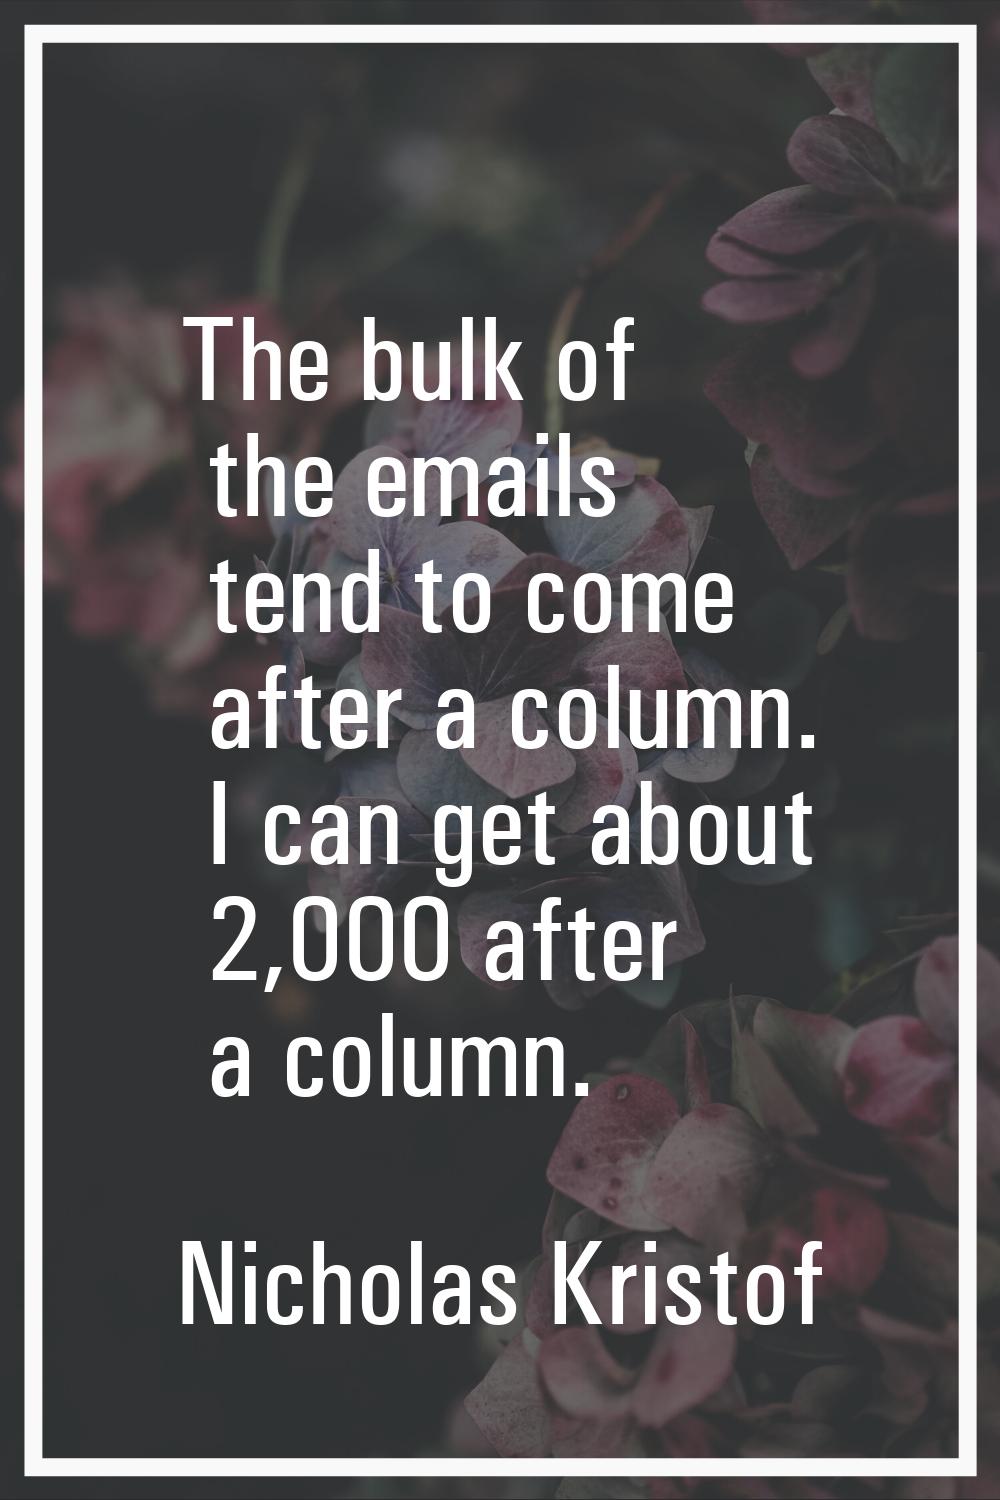 The bulk of the emails tend to come after a column. I can get about 2,000 after a column.